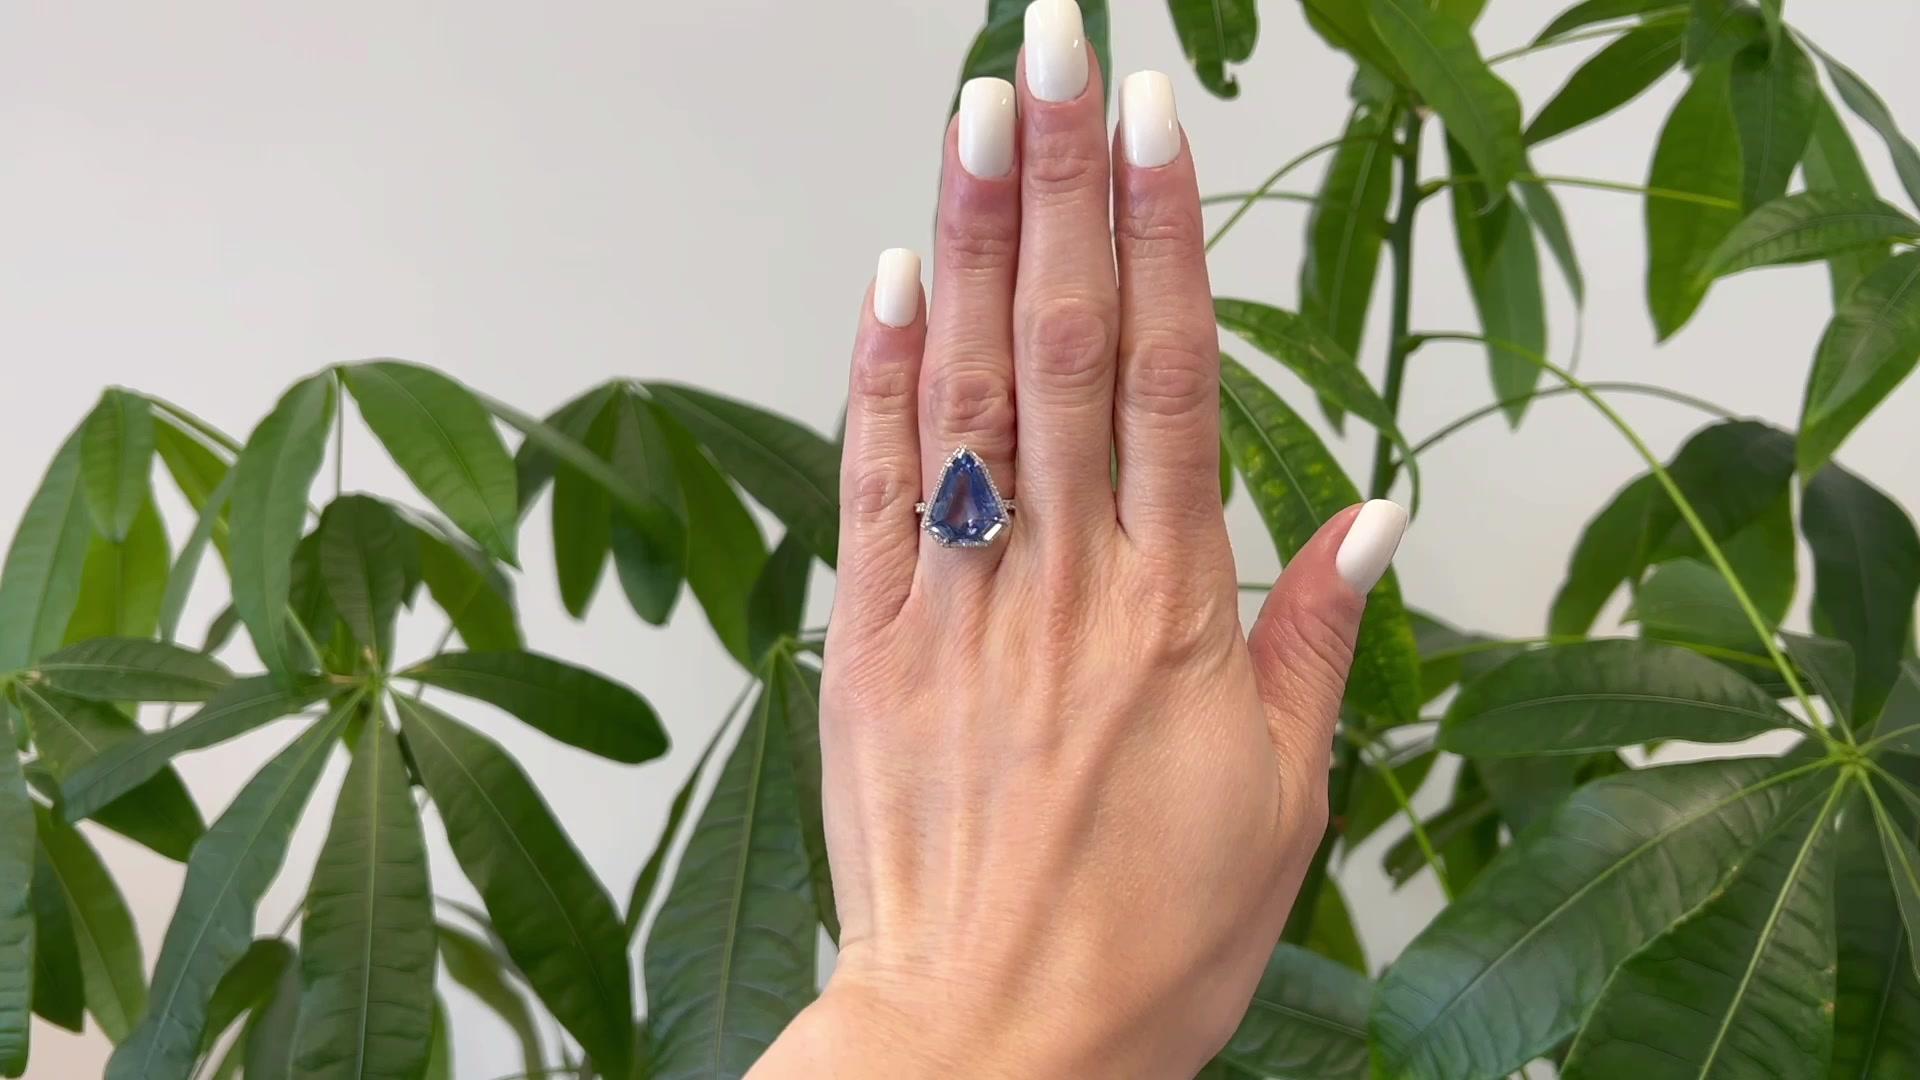 One GIA 7.41 Carats Ceylon Sapphire Diamond Platinum Ring. Featuring one GIA shield cut sapphire of 7.41 carats, accompanied with GIA stating the sapphire is of Ceylon (Sri Lanka) origin. Accented by 75 round brilliant cut diamonds with a total